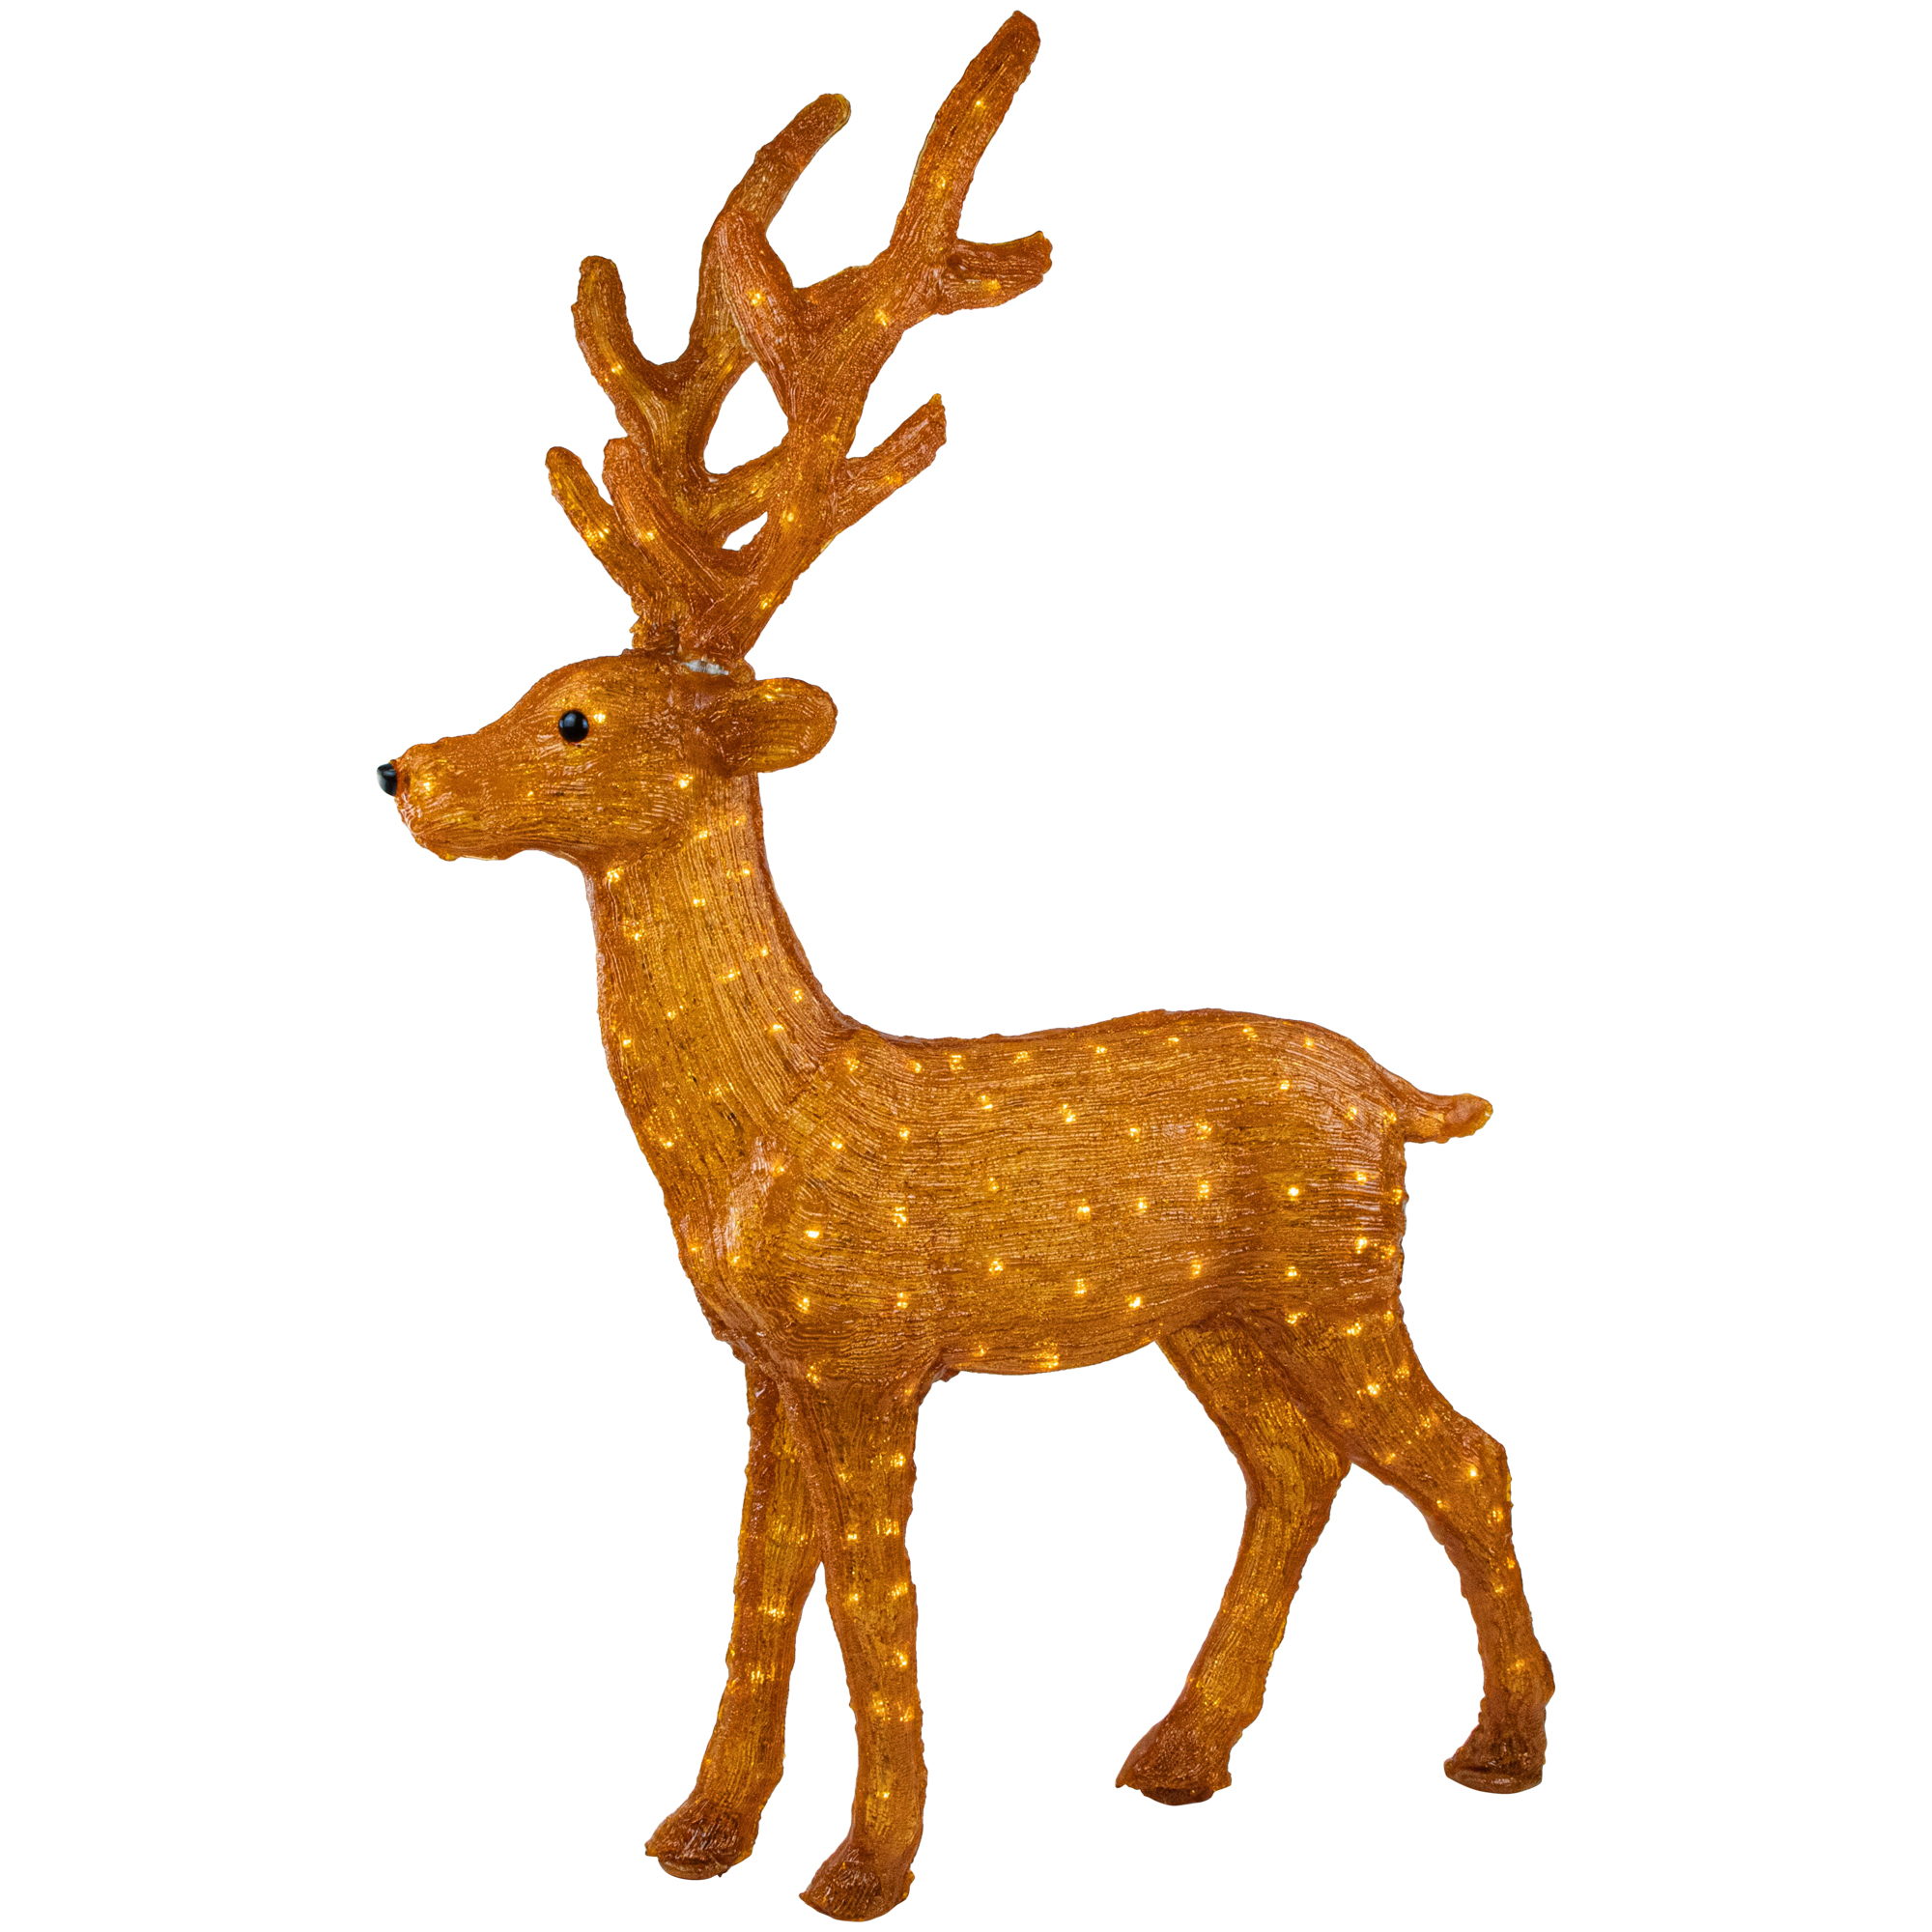 Northlight LED Lighted Commercial Grade Acrylic Reindeer Outdoor Christmas Decoration - 46"